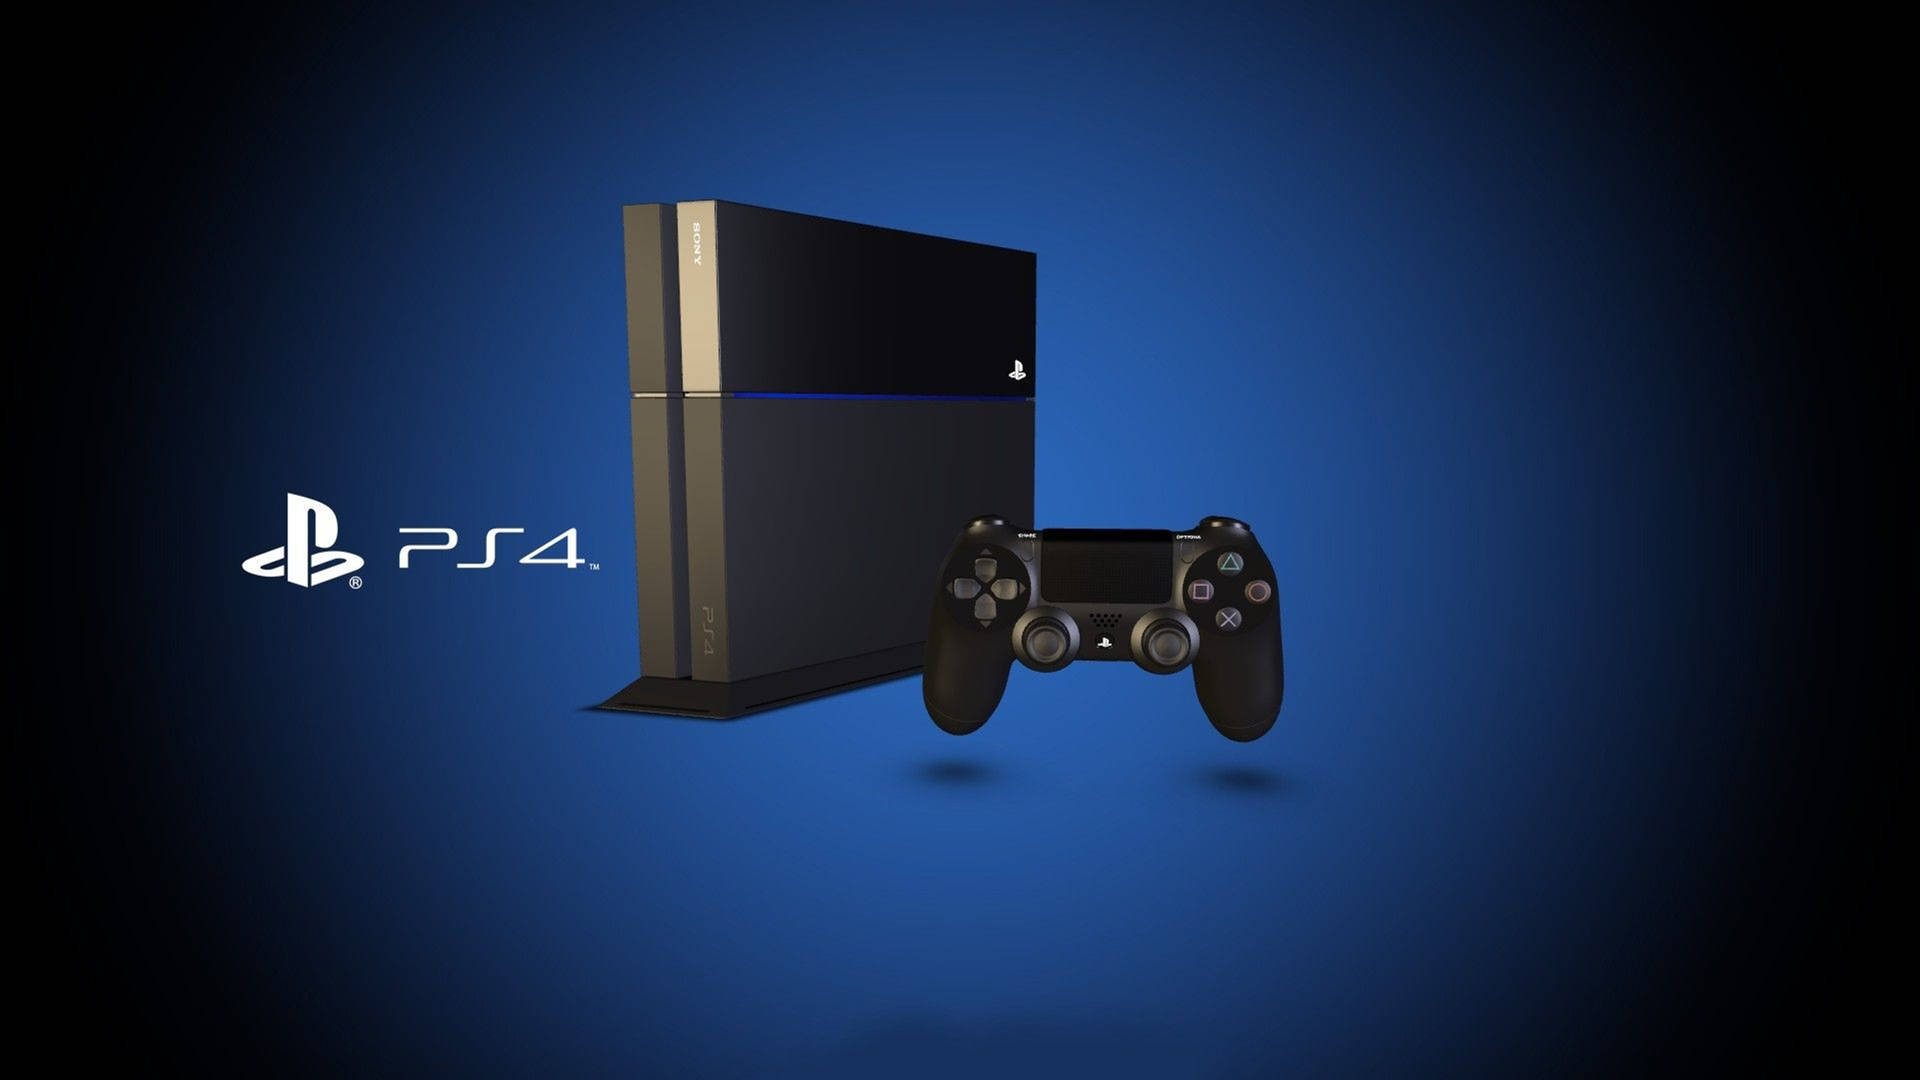 Download 4k Ps4 Console And Controller Wallpaper 